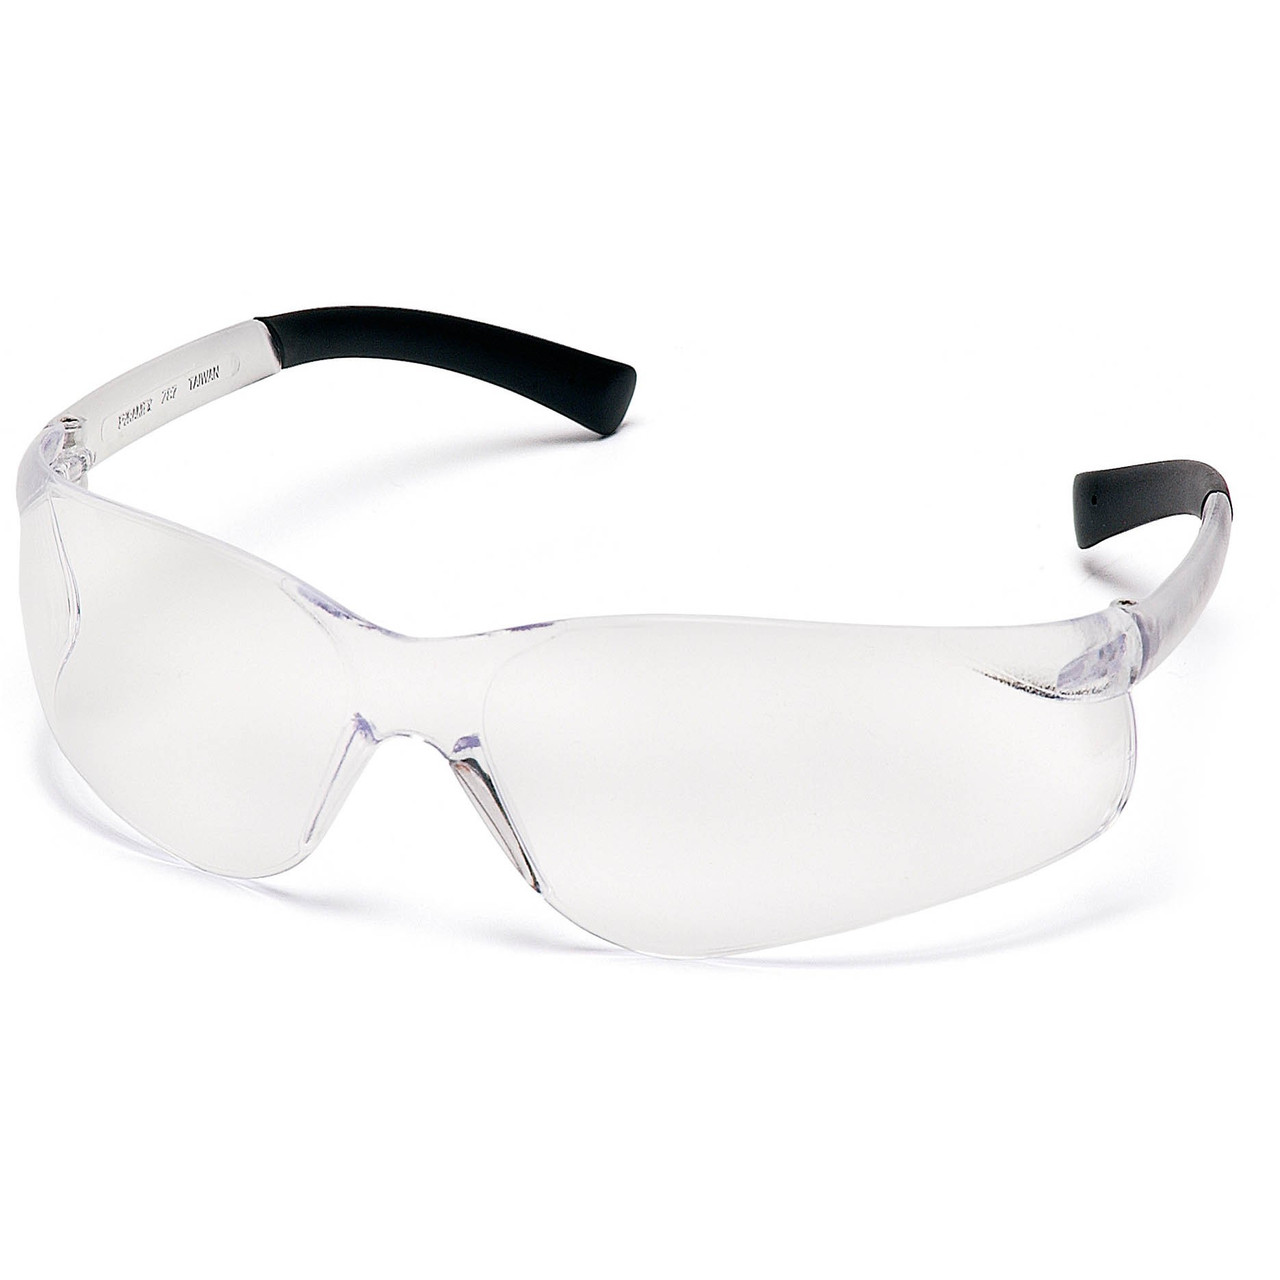 ZTEK CLEAR LENS WITH CLEAR FRAME